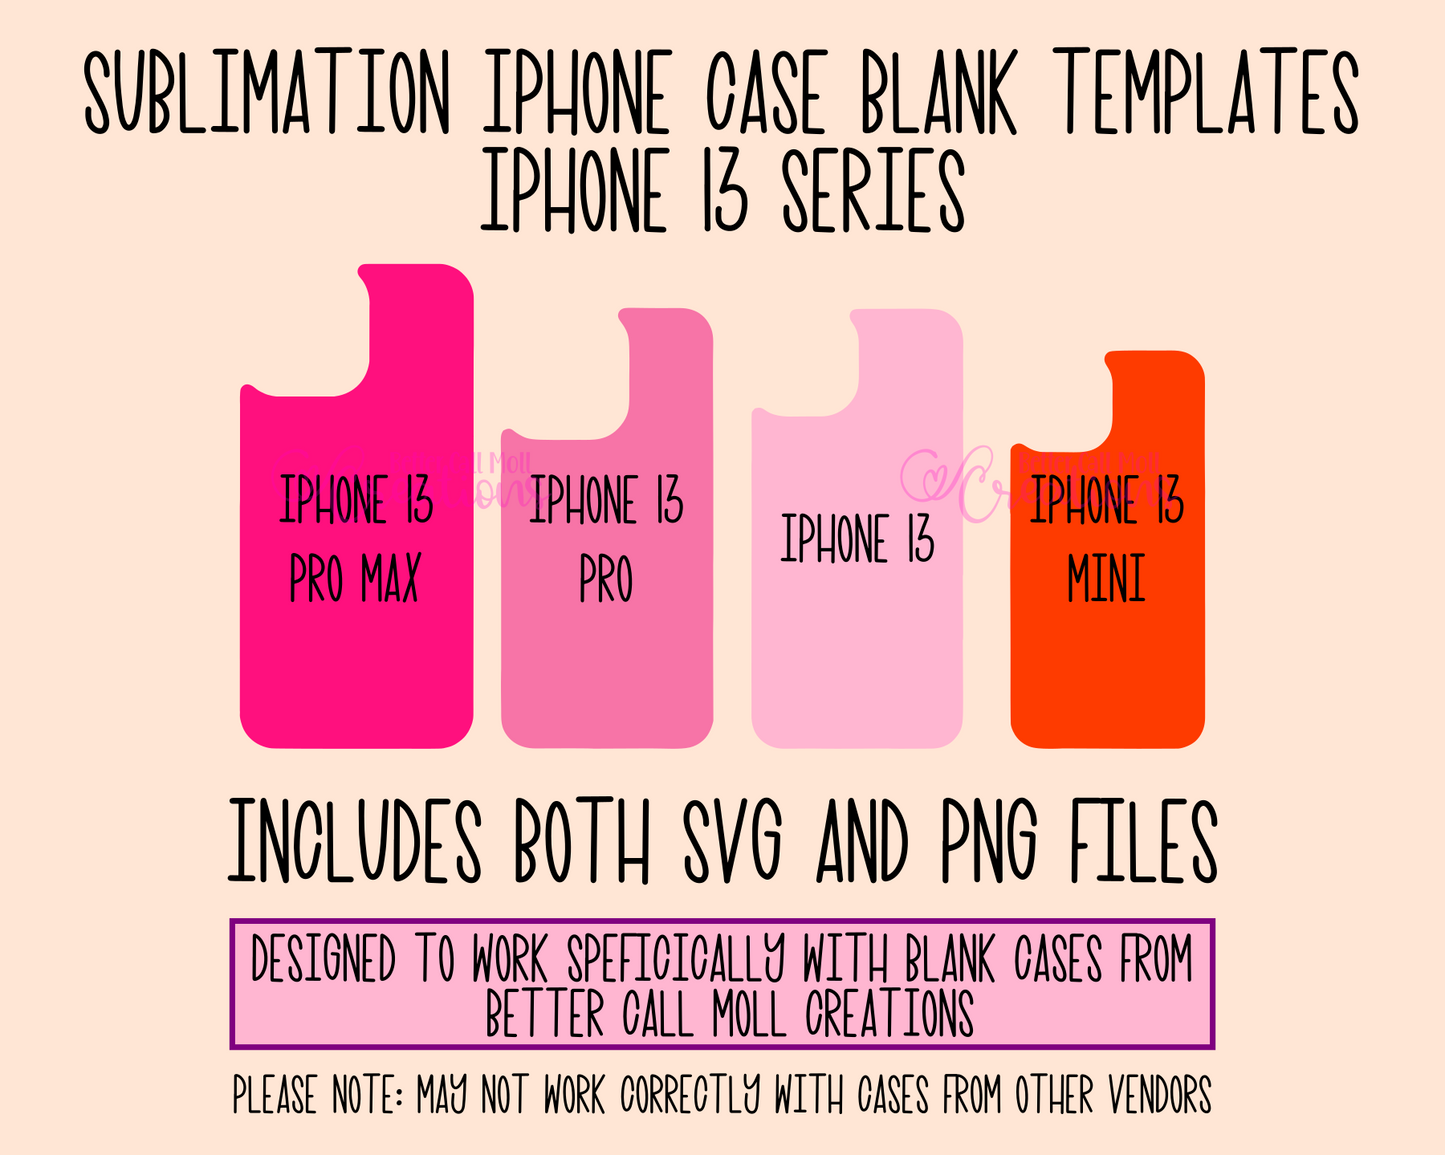 Templates for Sublimation Blank iPhone 13 Series Cases | Instant Digital Download